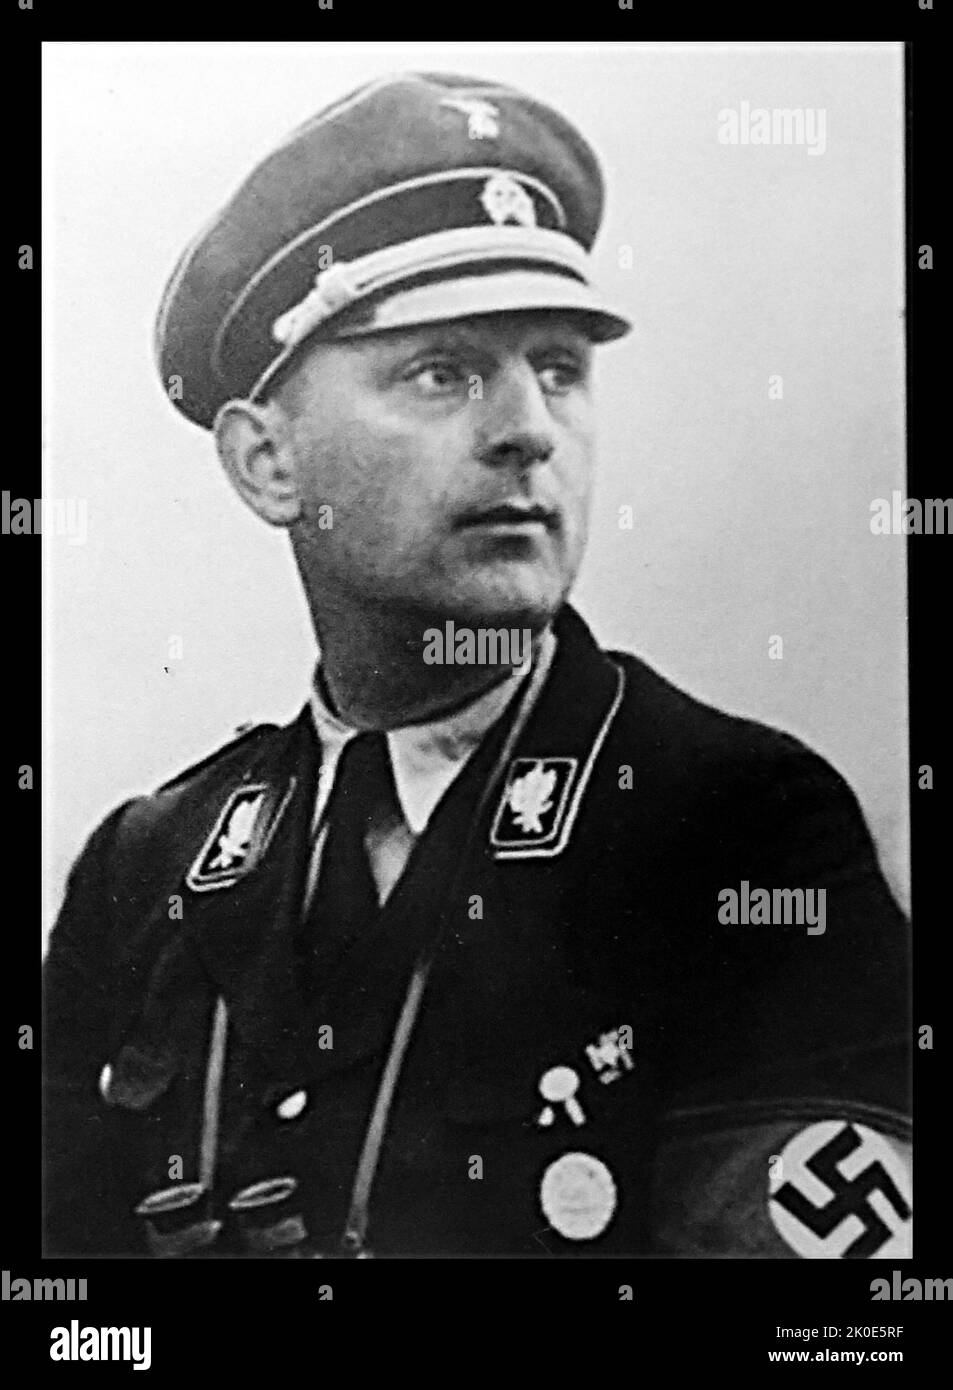 Kurt Daluege (1897 - 1946); chief of the national uniformed Ordnungspolizei (Order Police) of Nazi Germany. Following Reinhard Heydrich's assassination in 1942, he served as Deputy Protector for the Protectorate of Bohemia and Moravia. After the end of World War II, he was extradited to Czechoslovakia, tried, convicted and executed in 1946. Stock Photo